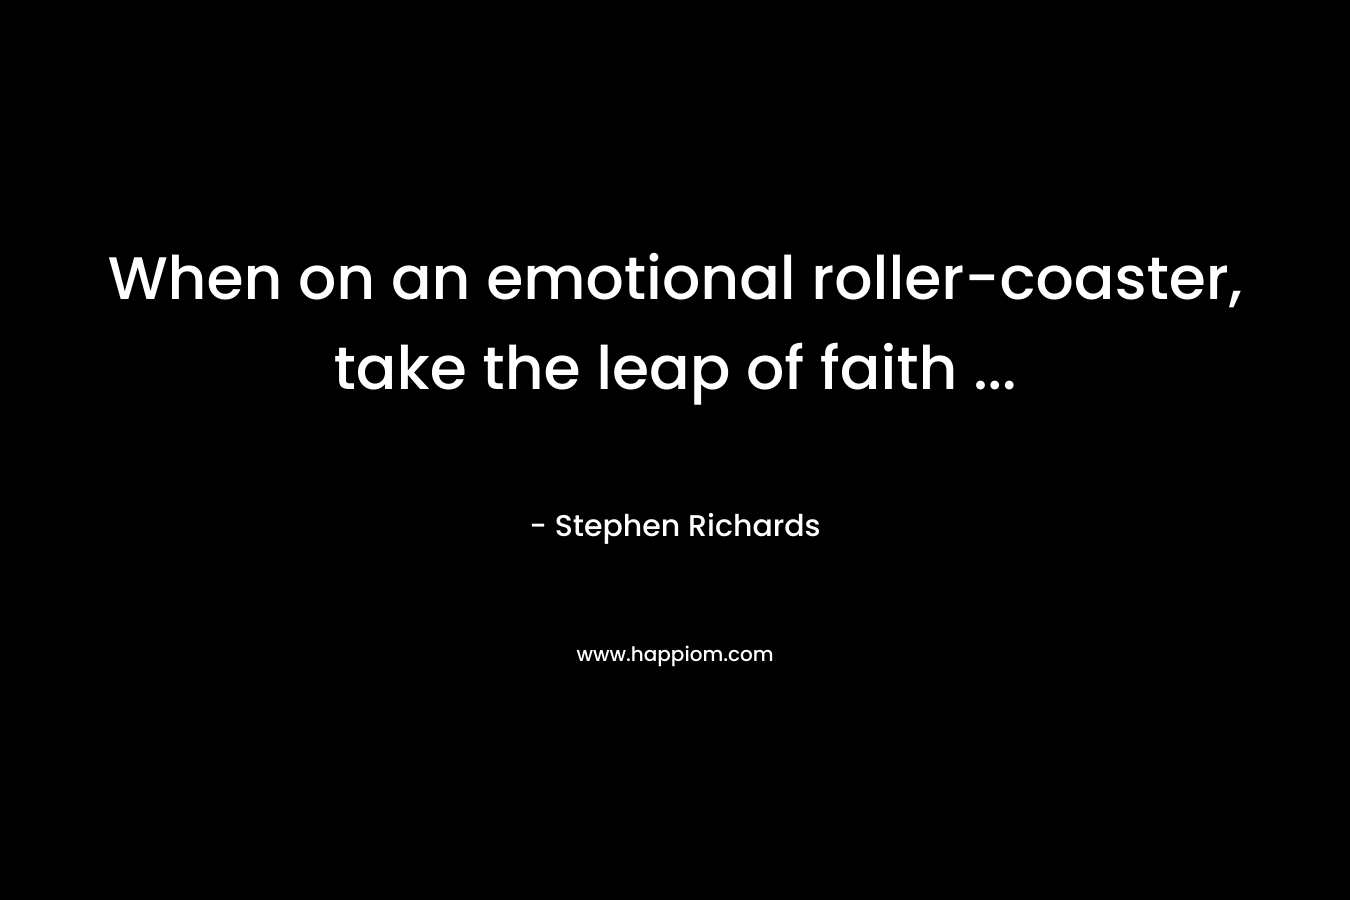 When on an emotional roller-coaster, take the leap of faith … – Stephen Richards